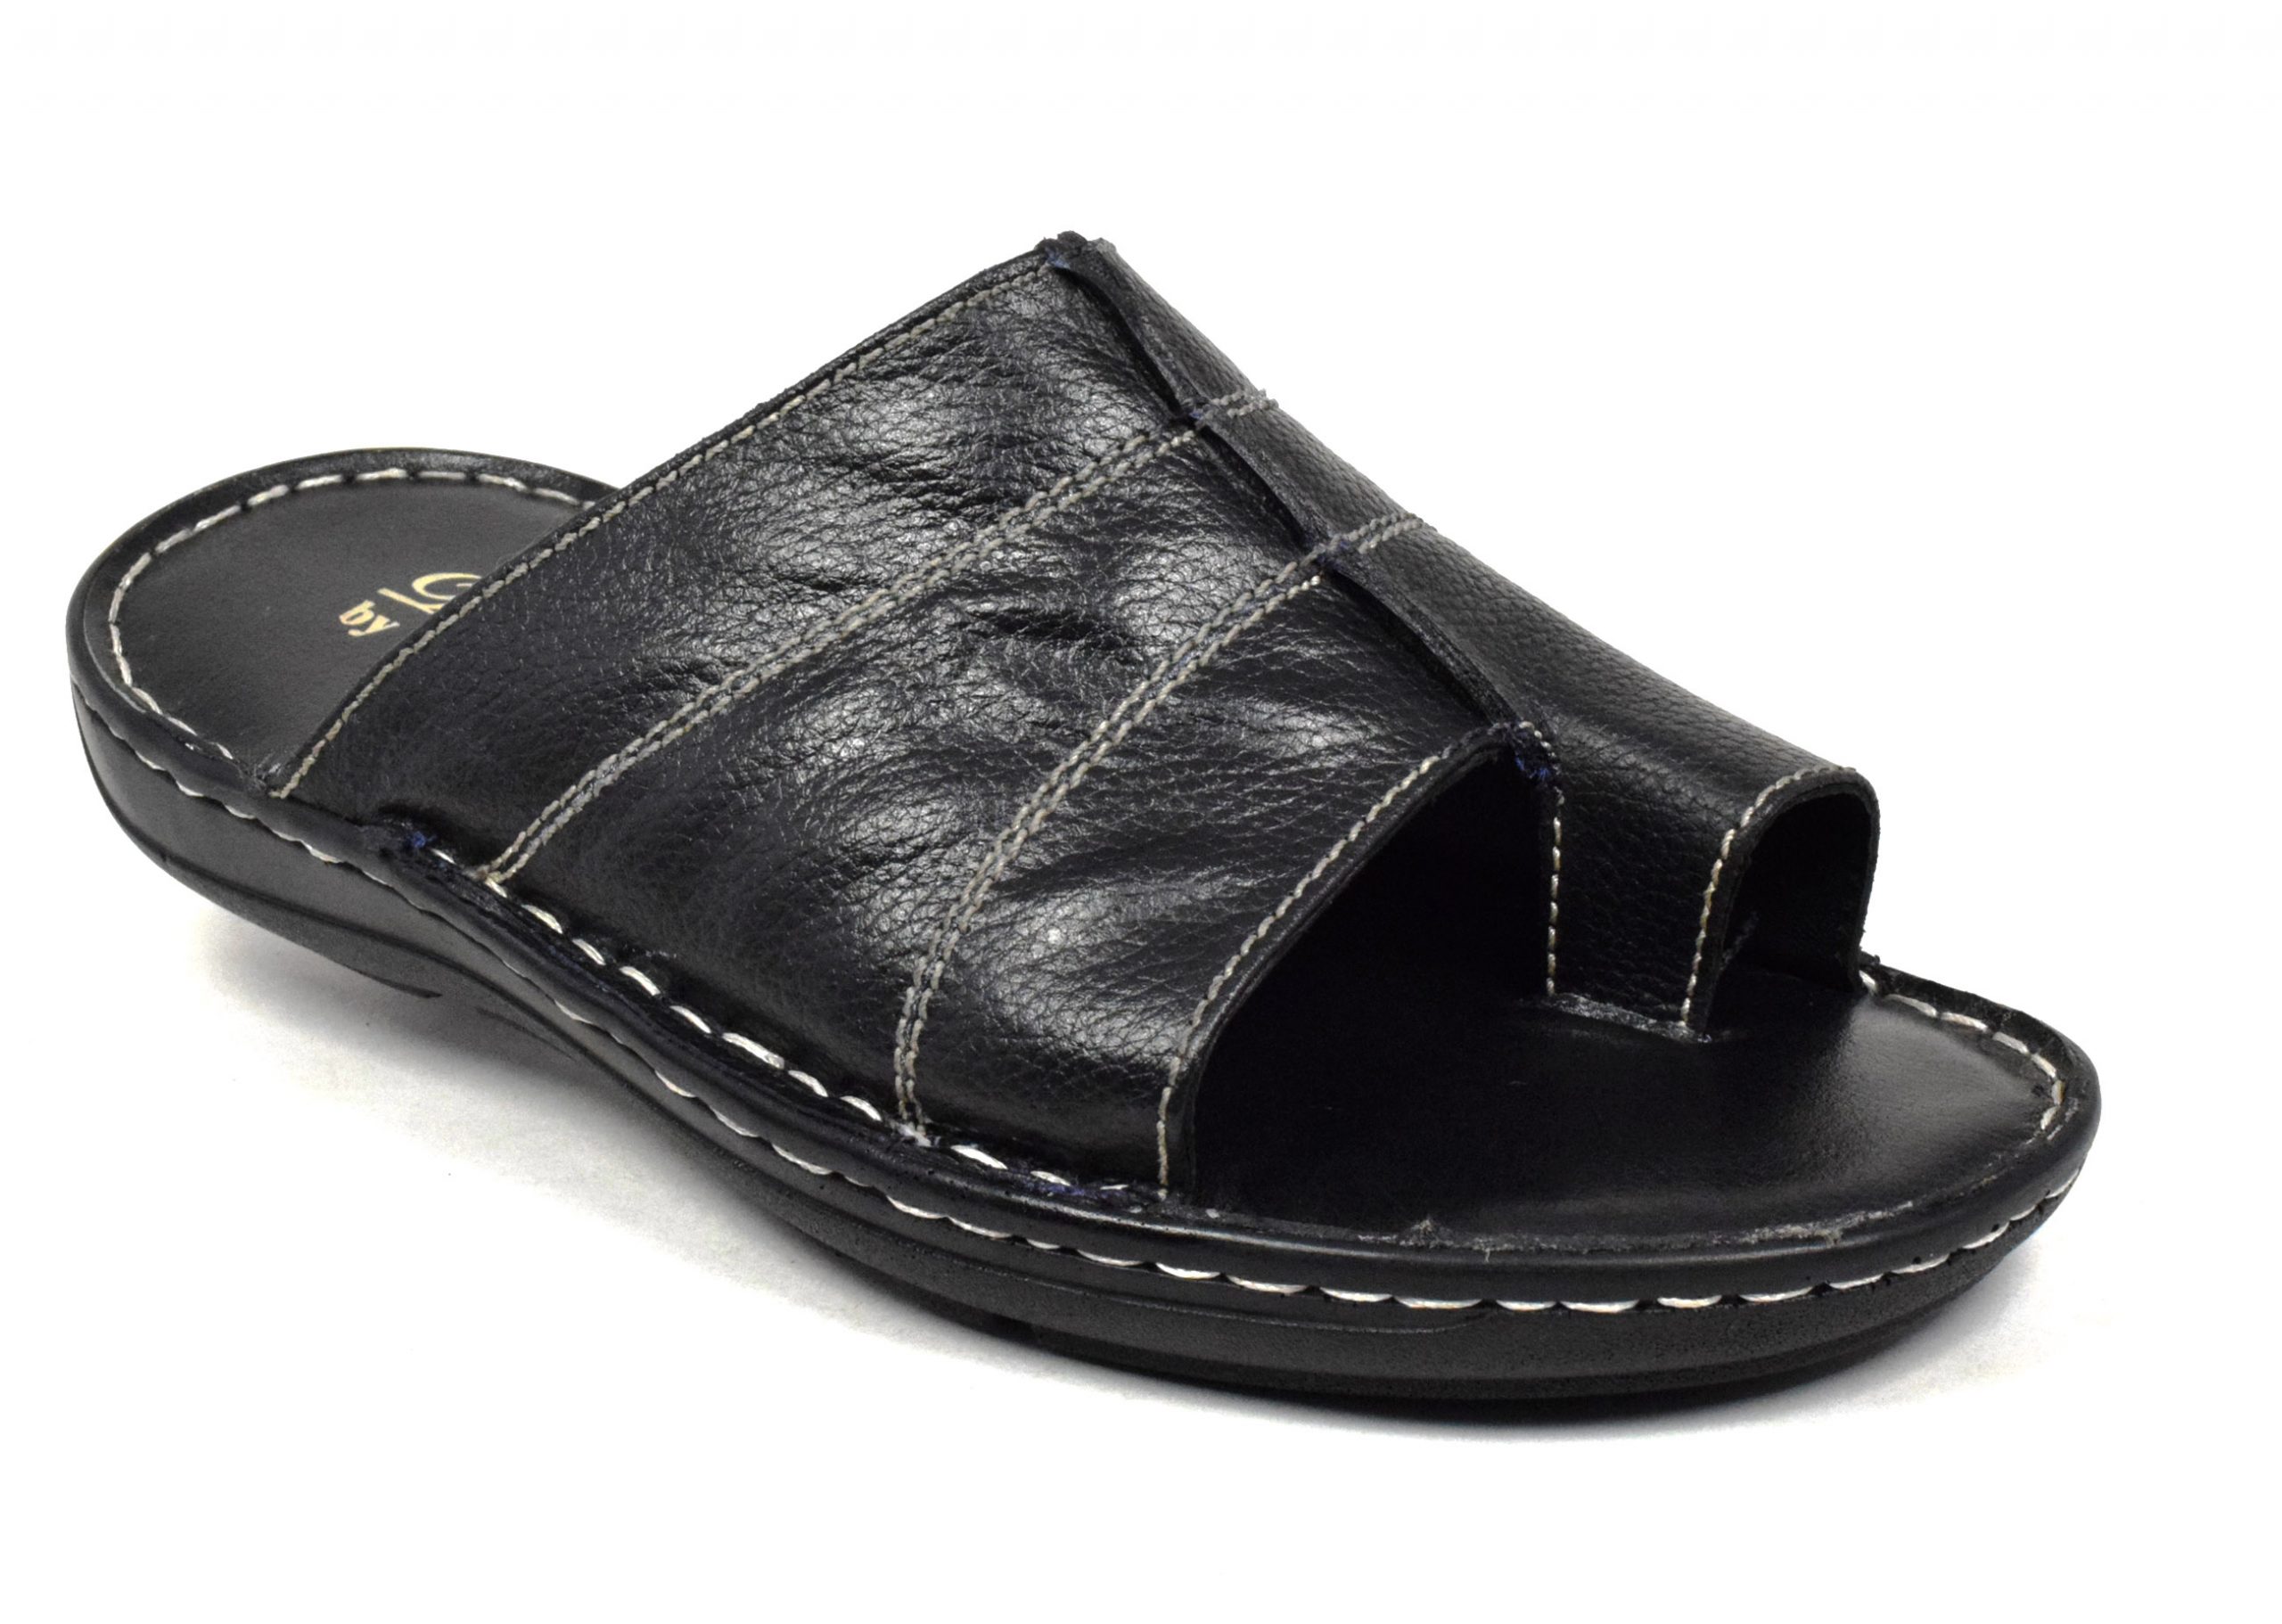 Men Sandals With Toe Support